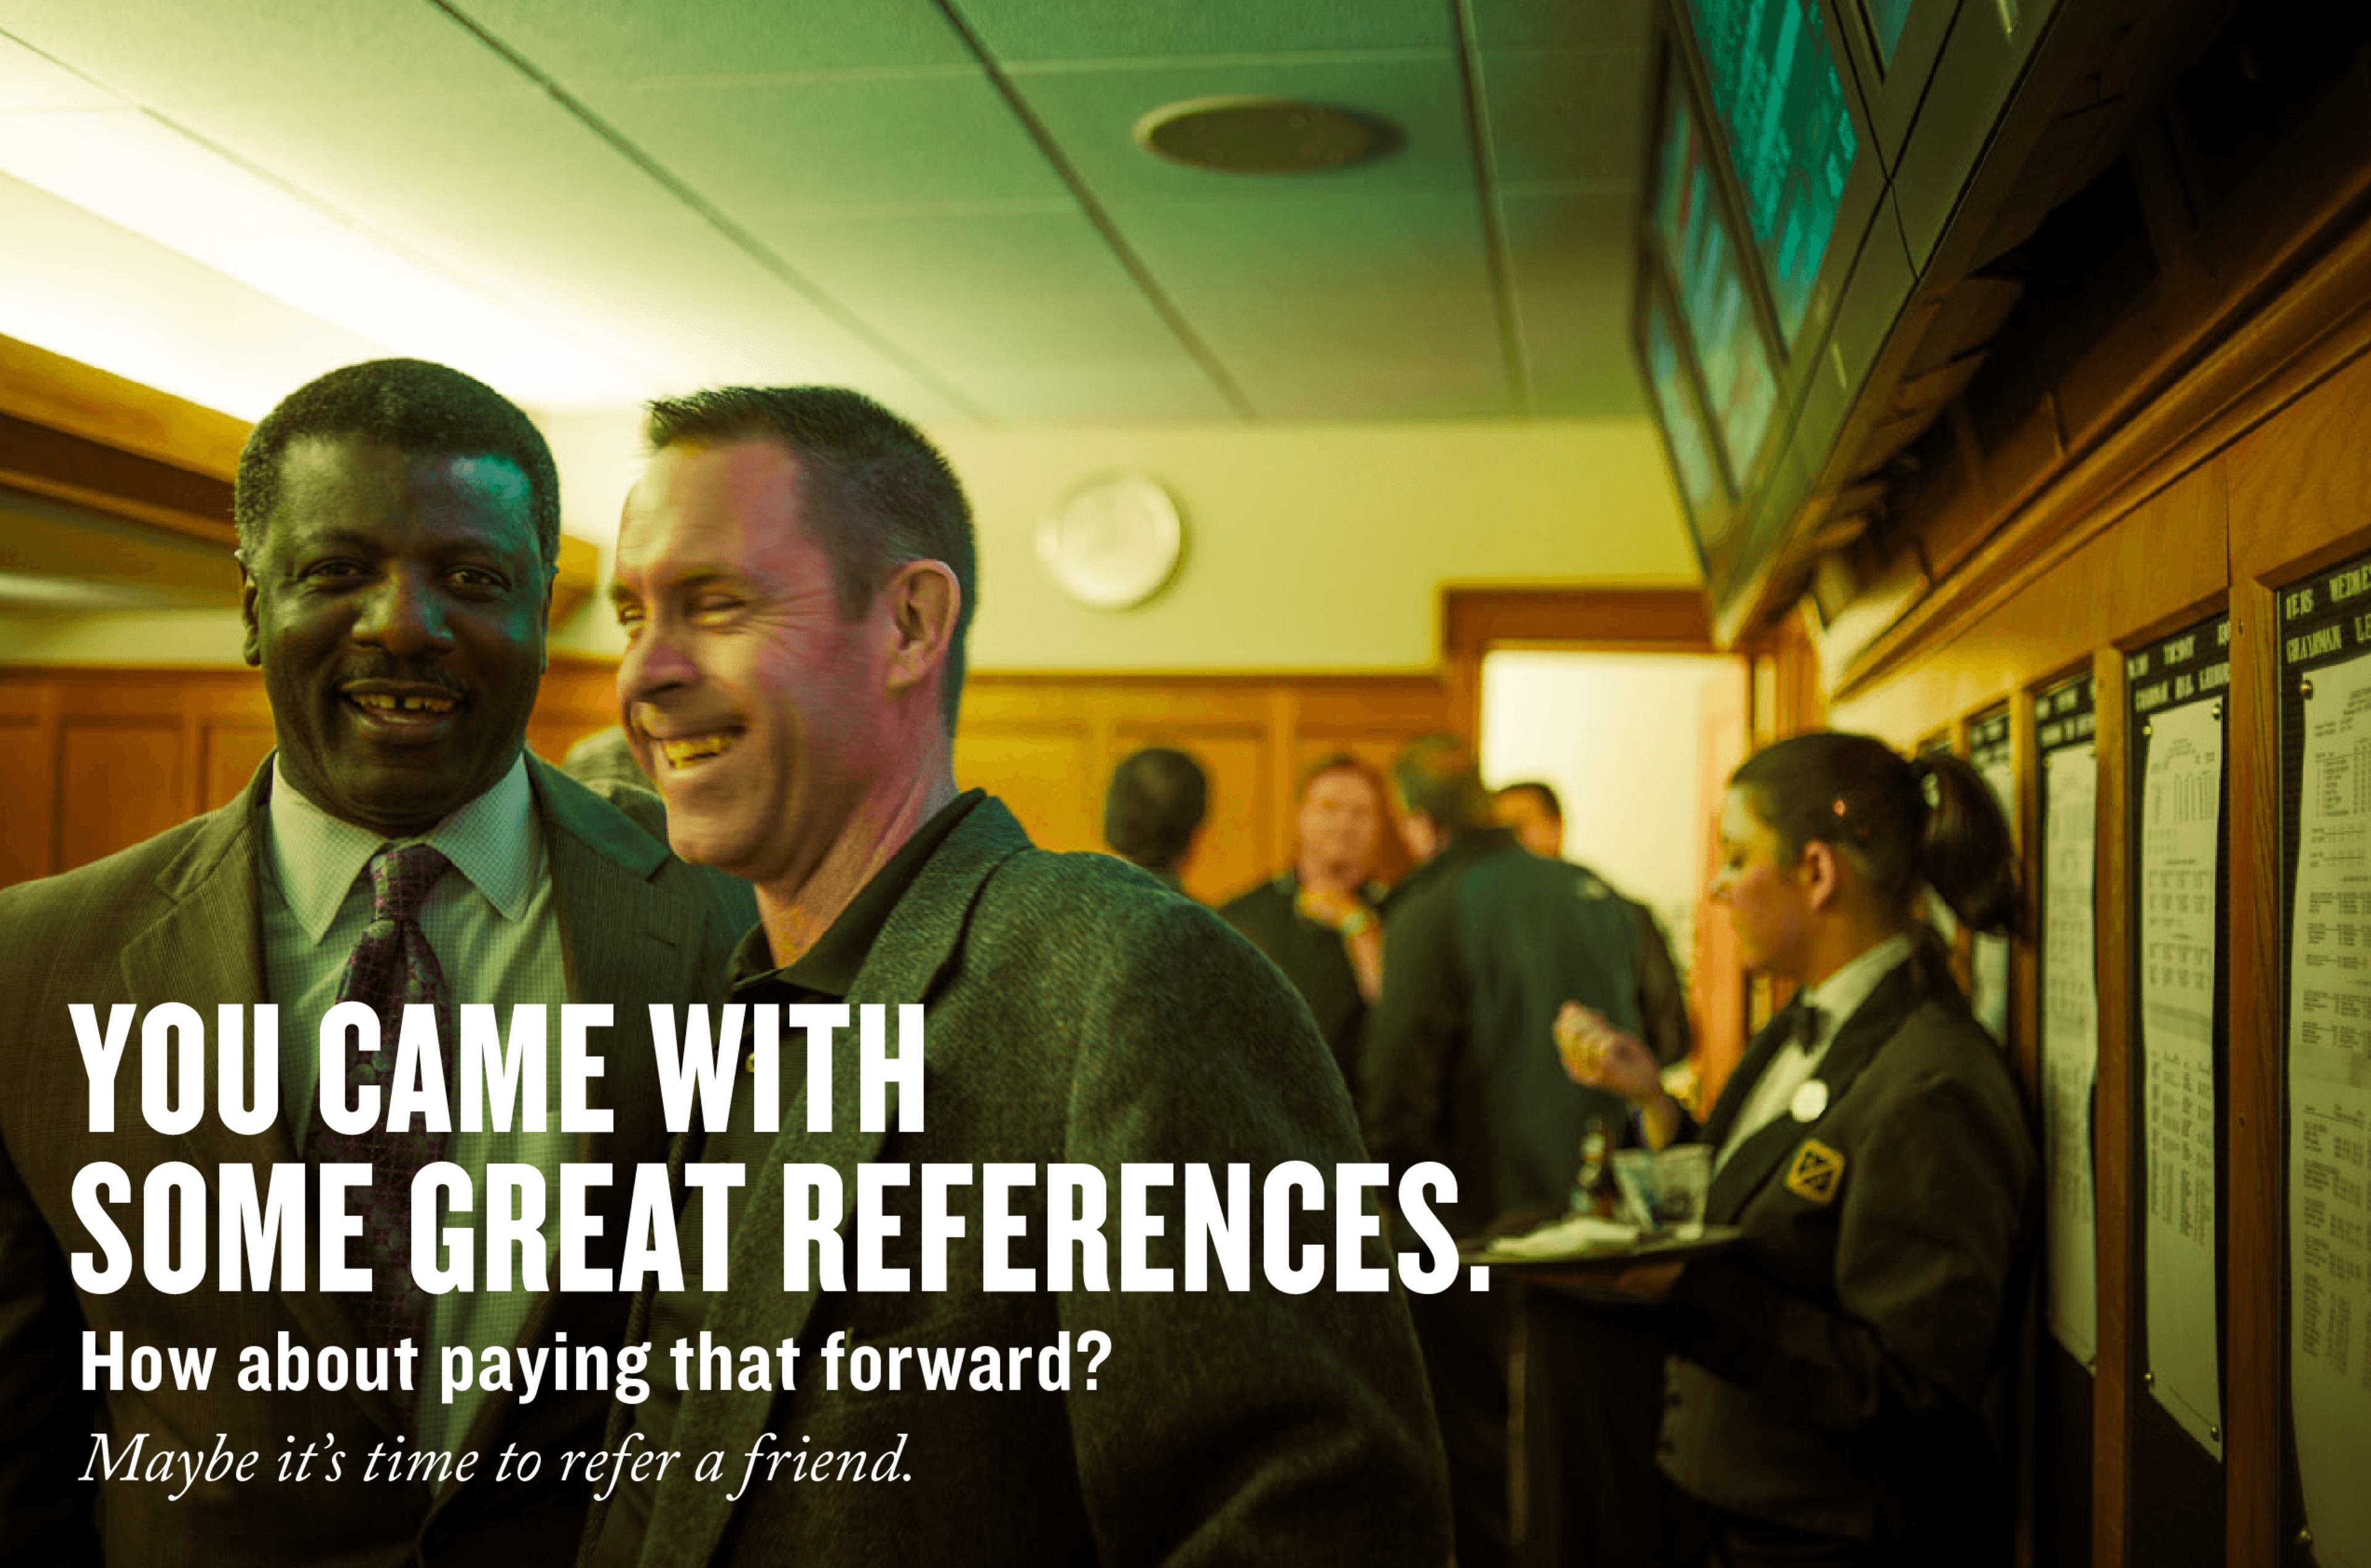 You came with some great references. How about pay that forward? Maybe it's time to refer a friend.